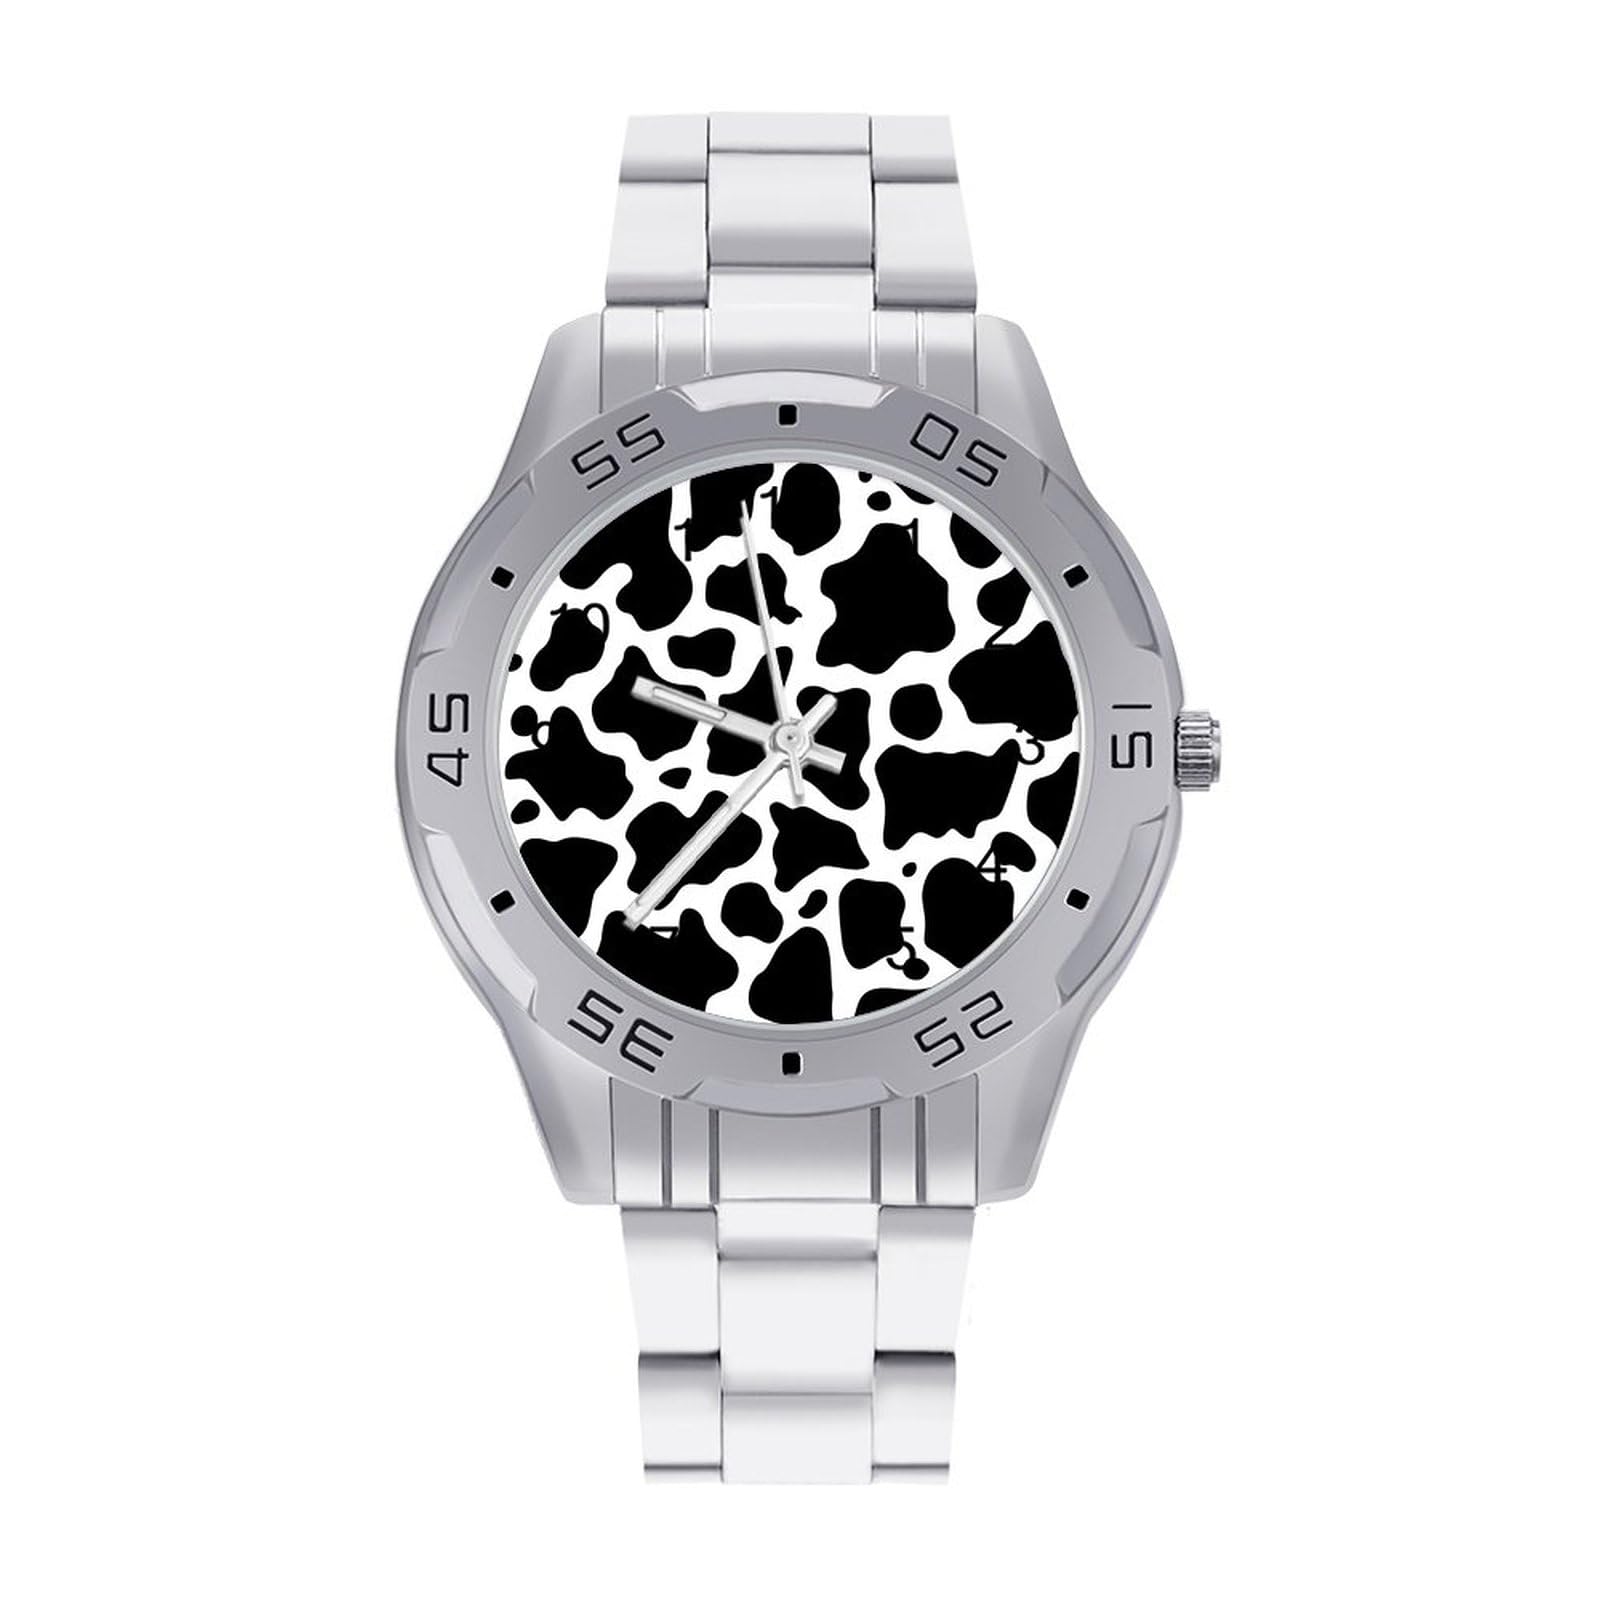 Cow Pattern Stainless Steel Band Business Watch Dress Wrist Unique Luxury Work Casual Waterproof Watches